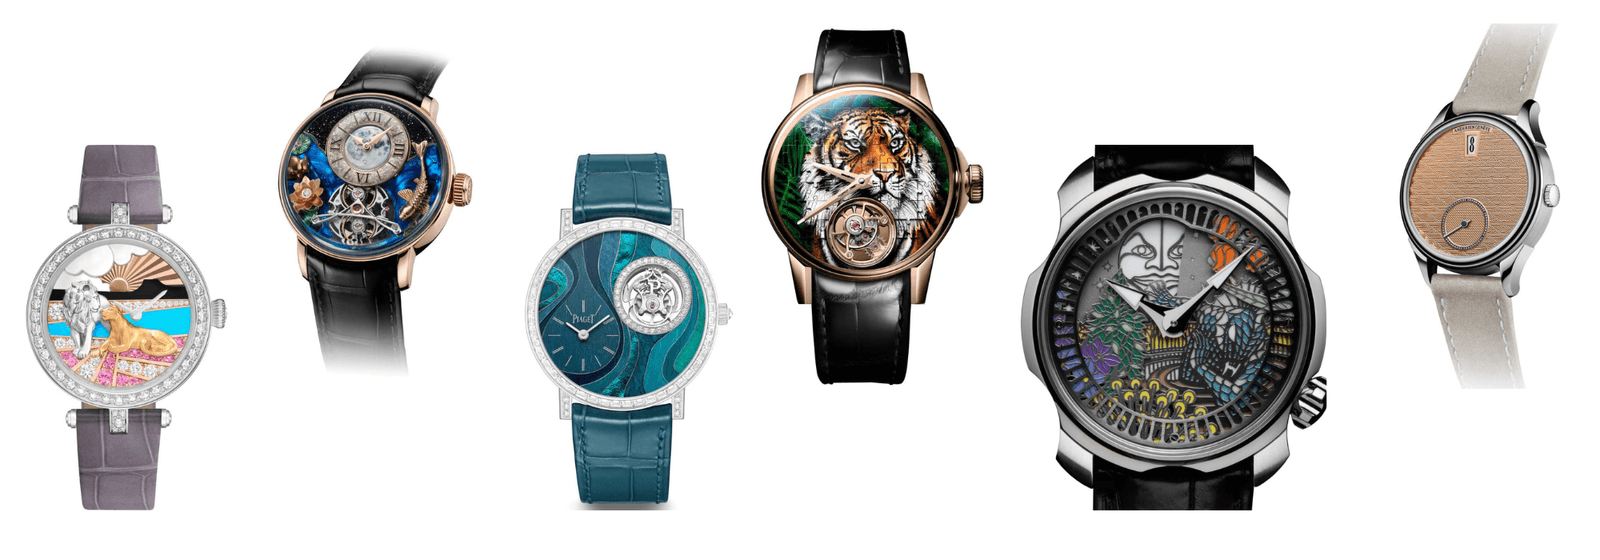 GPHG 2023 : Nominations For The Artistic Watch Of The Year